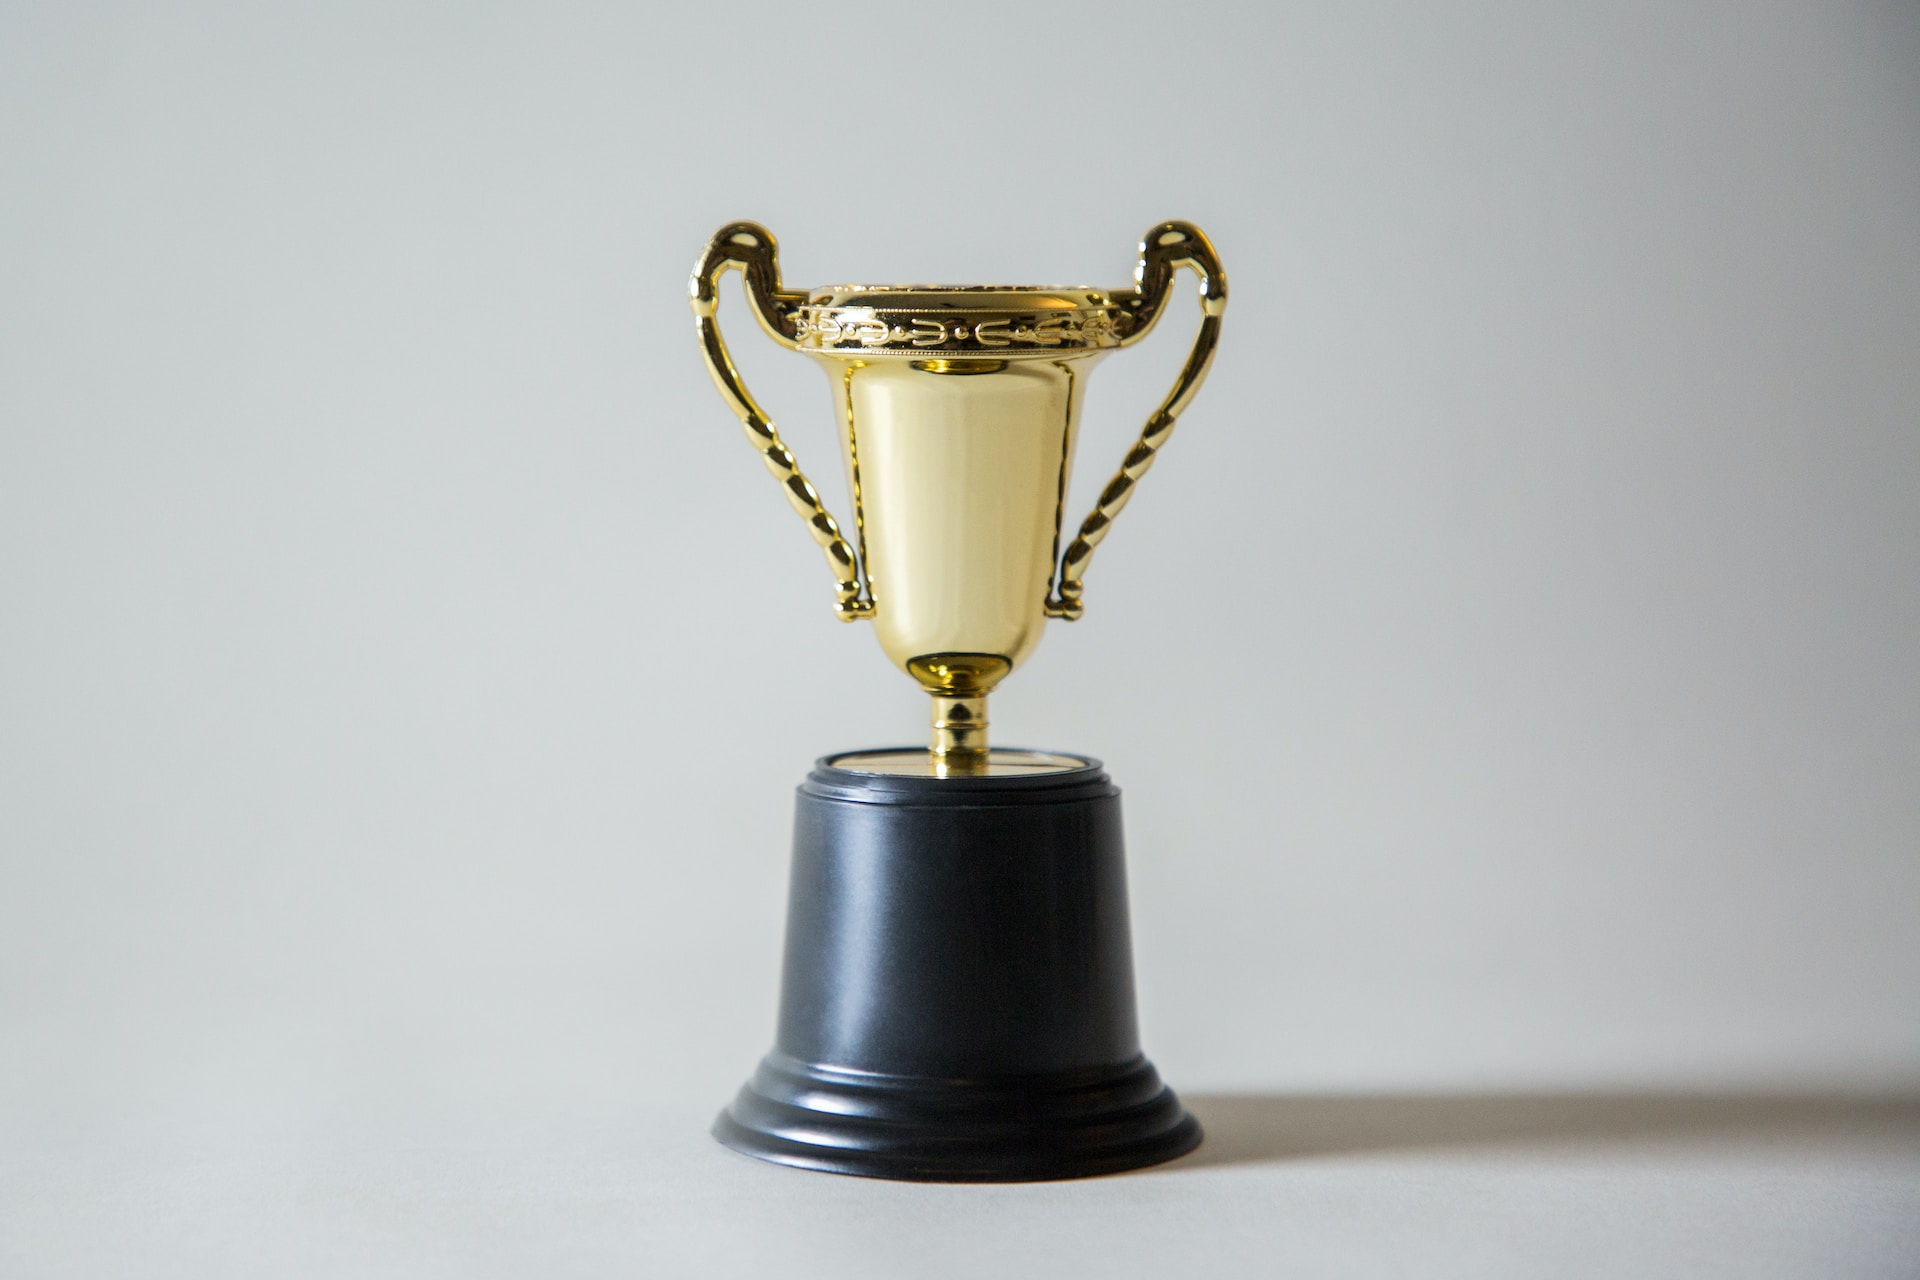 A photo of a small trophy, on a plain light grey surface in front of a grey background.